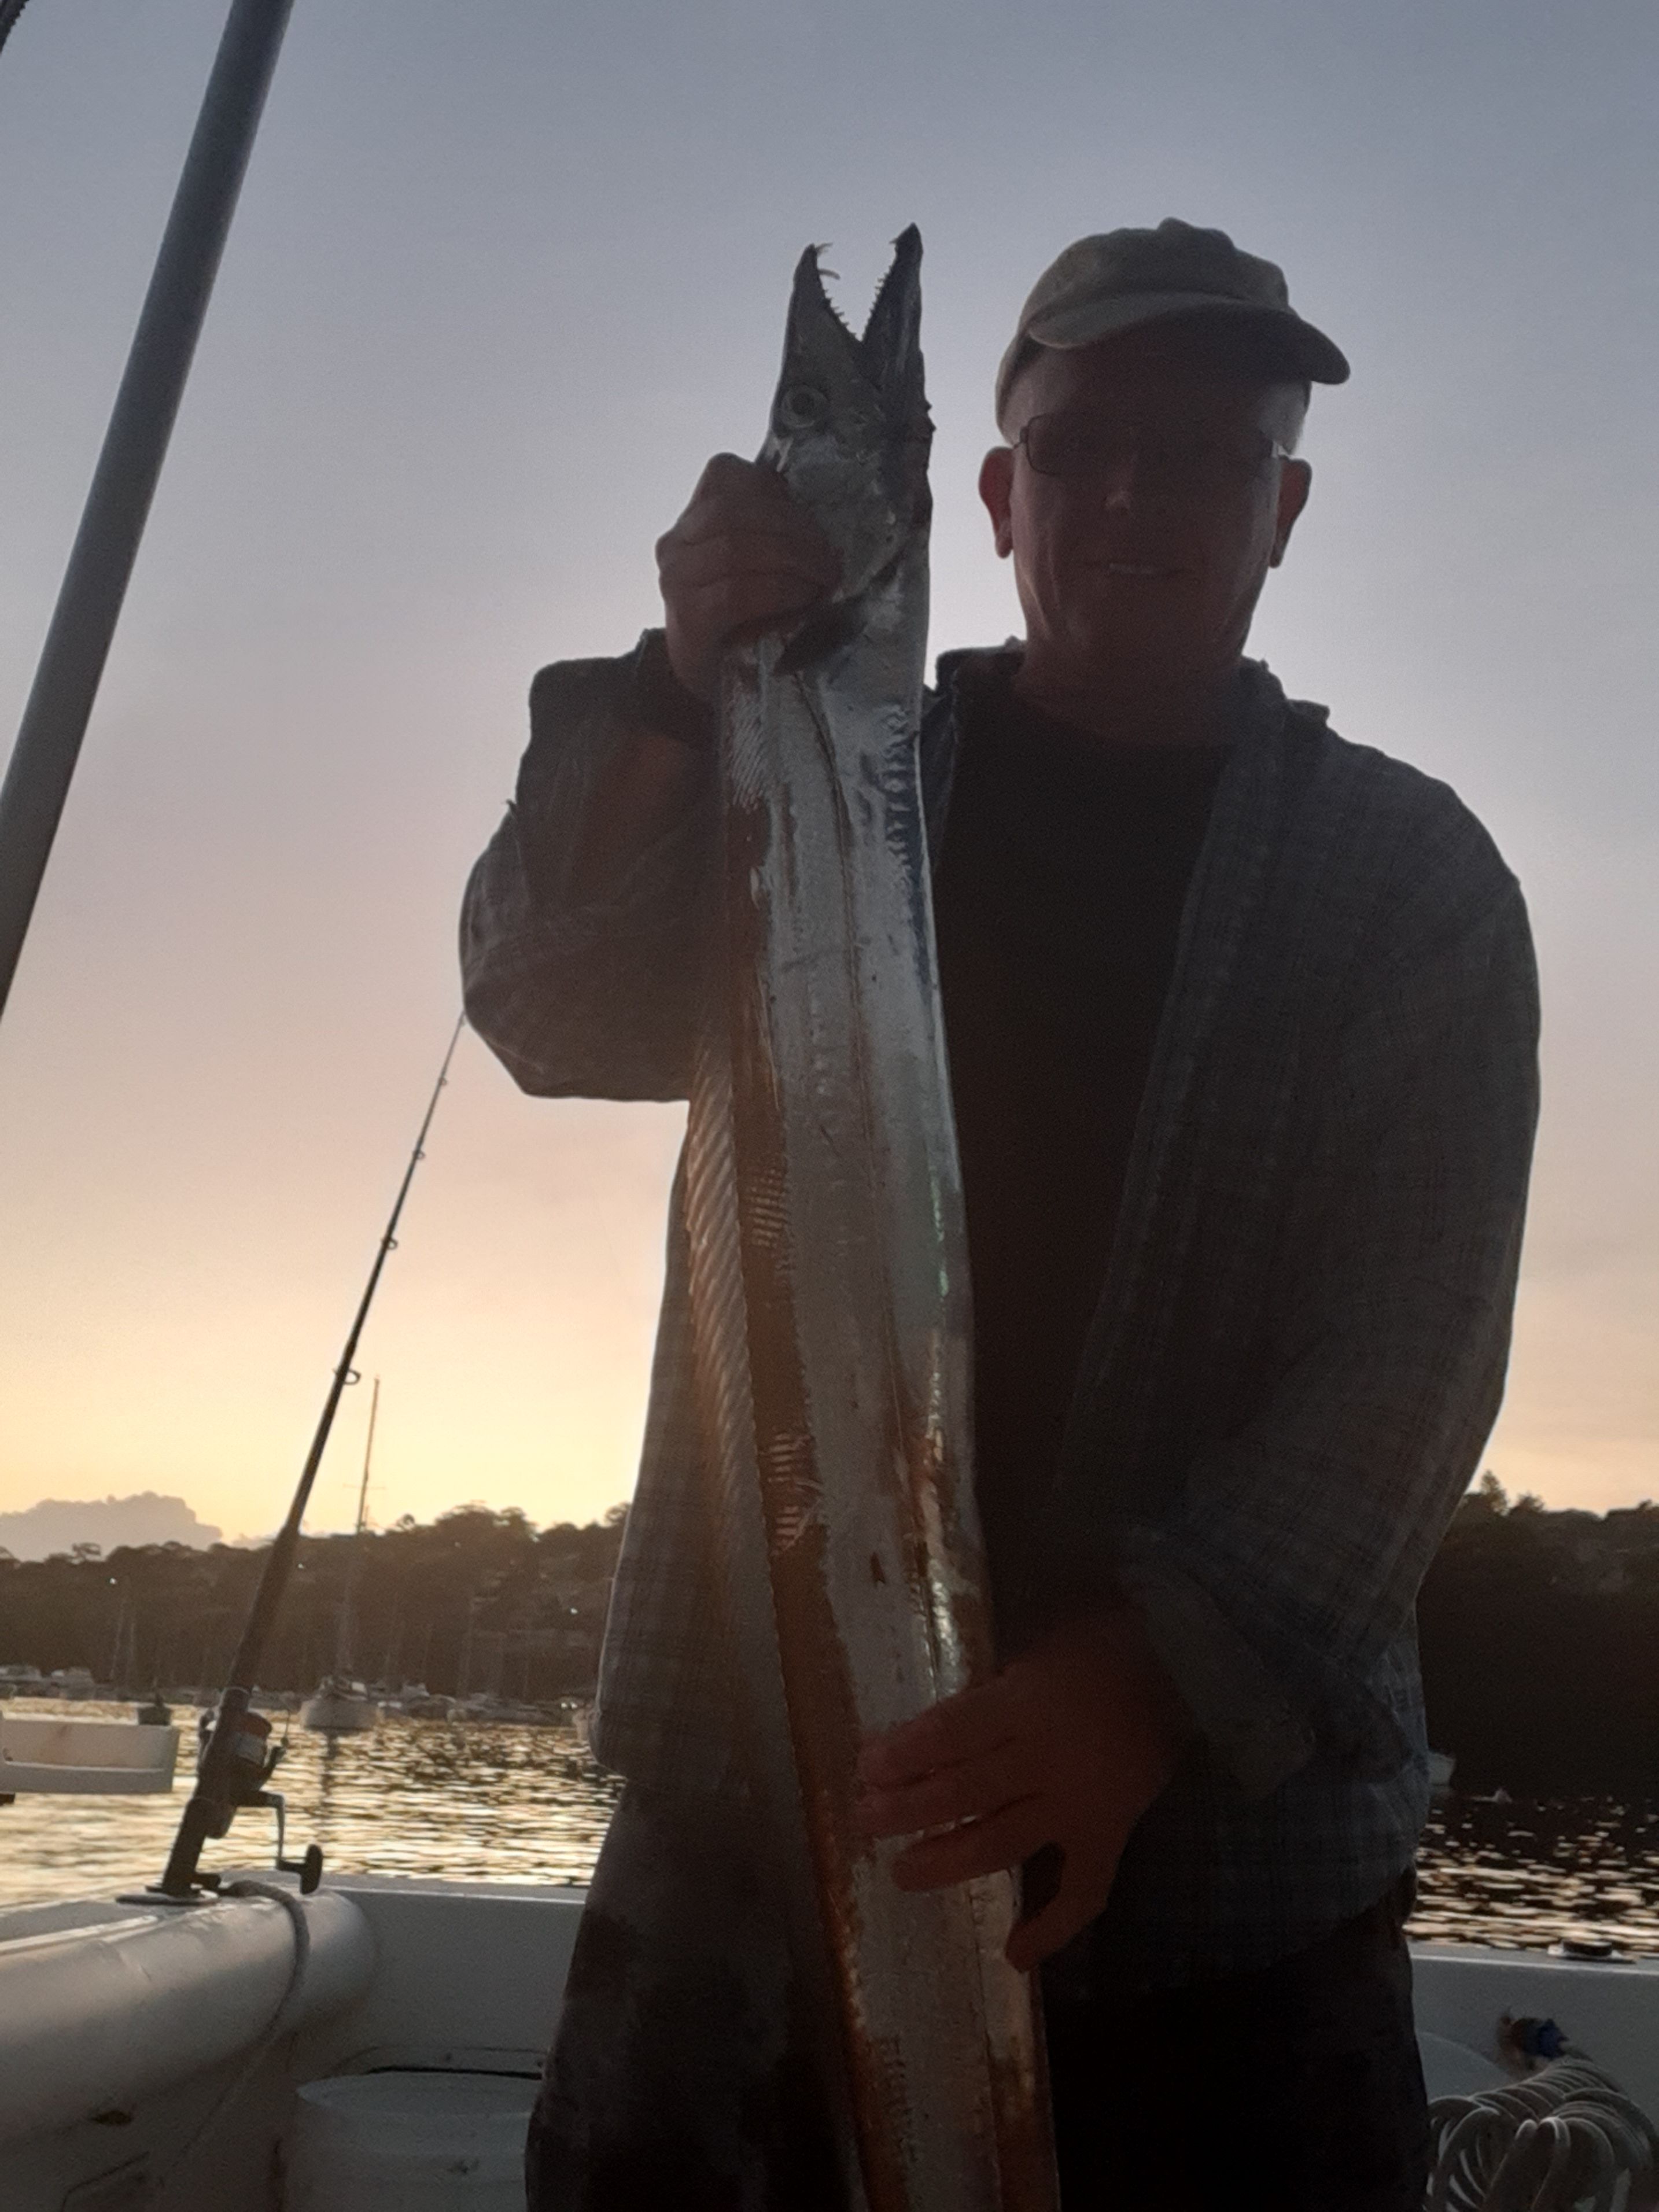 Whole day at Clifton Gardens - Fishing Reports - DECKEE Community